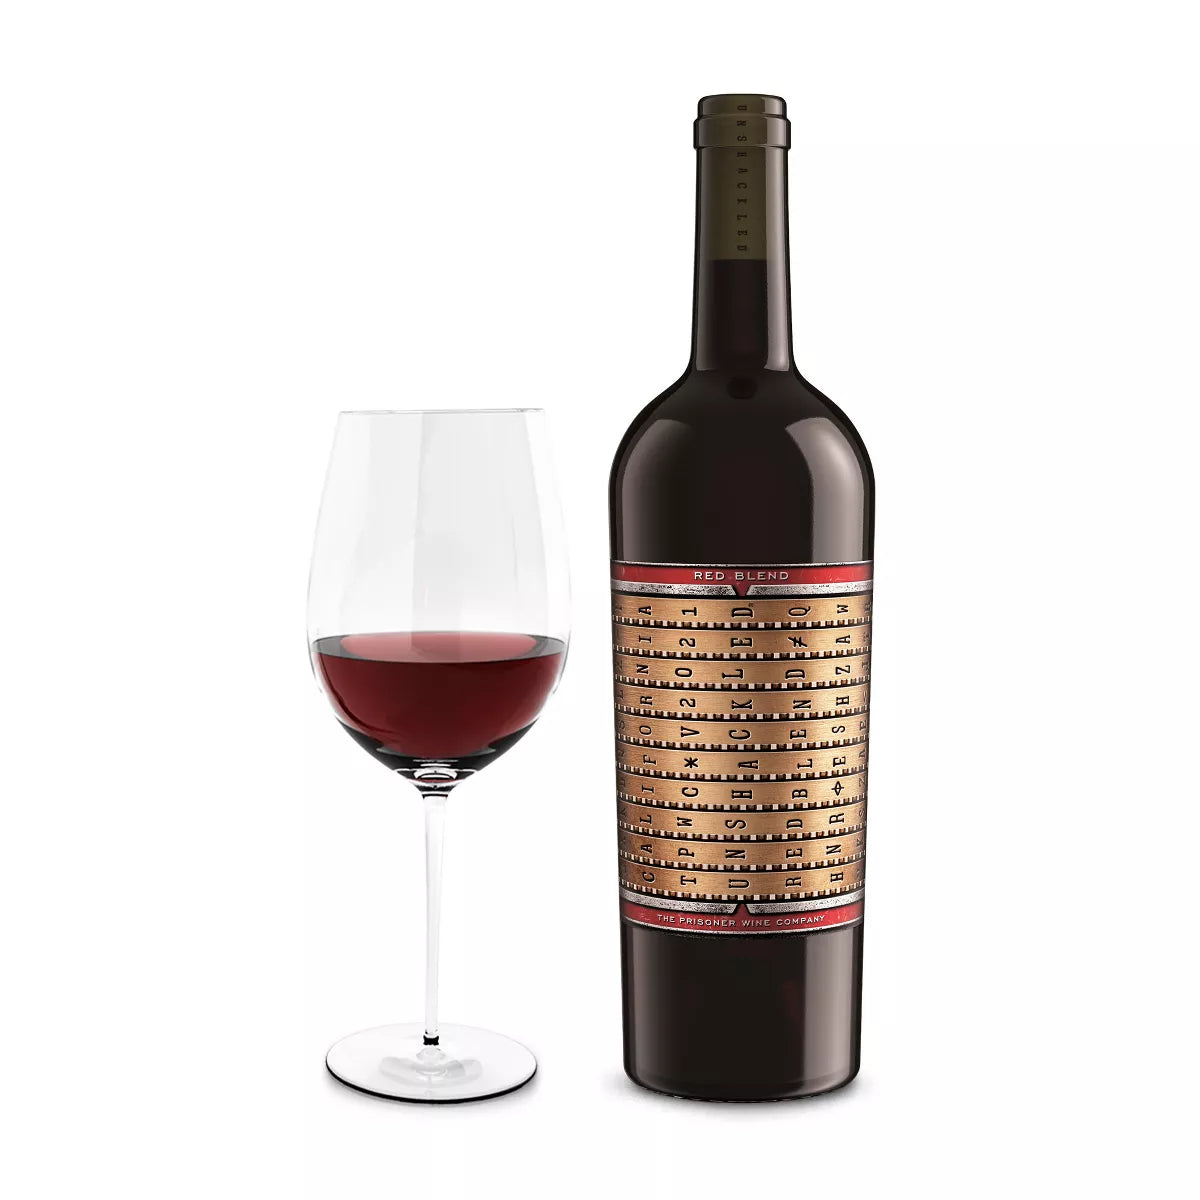 Unshackled Red Blend Red Wine By The Prisoner 750ml